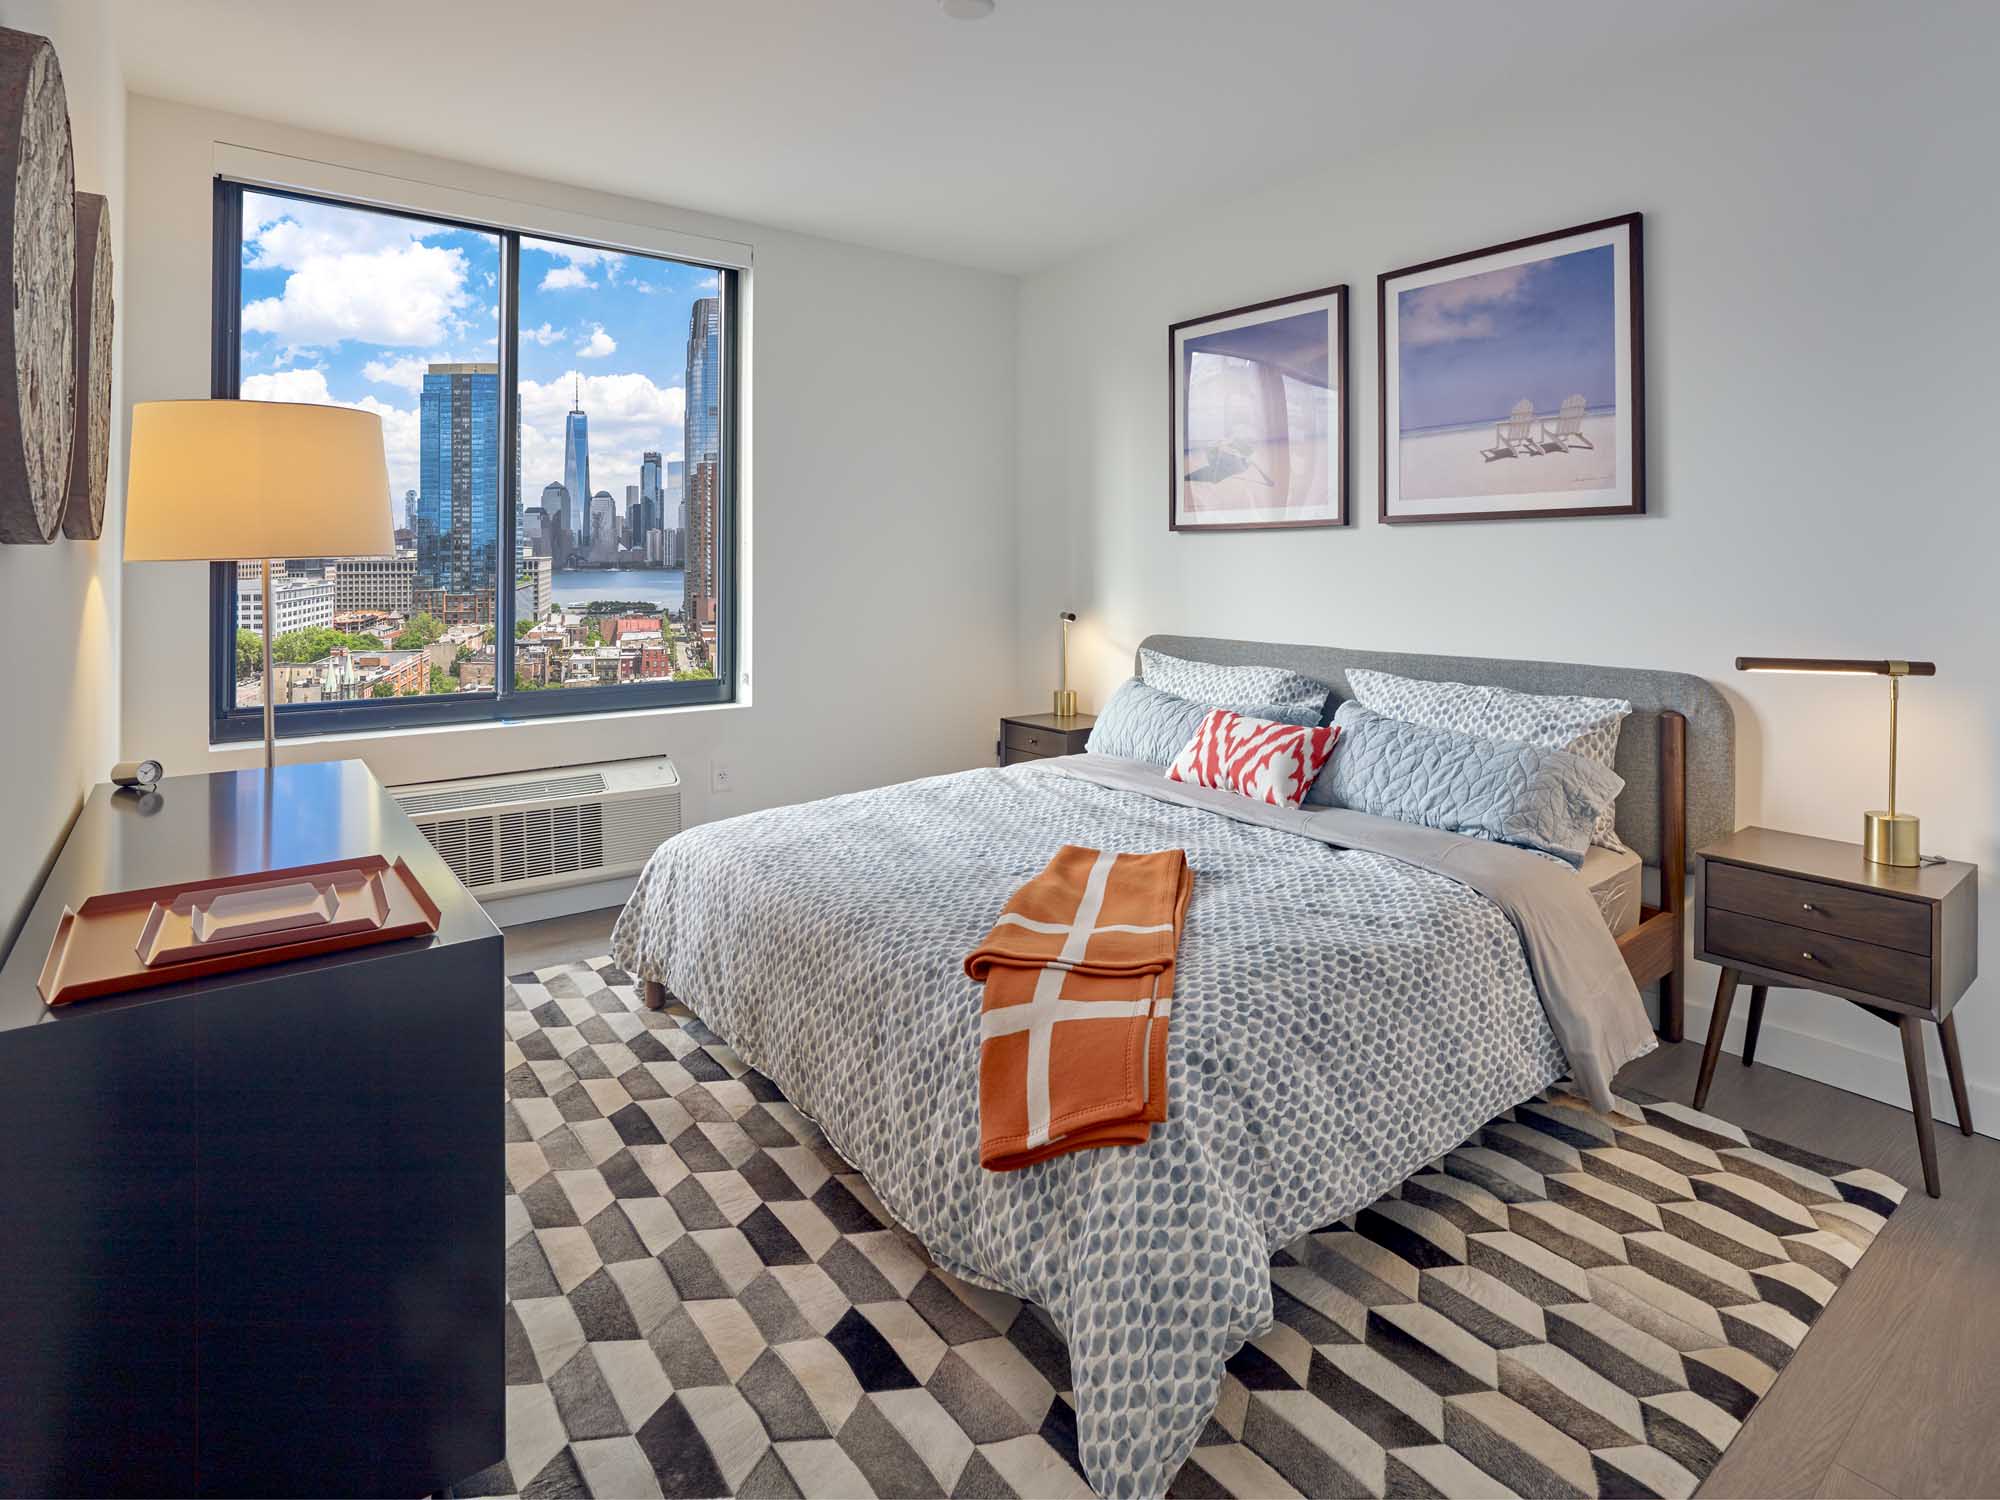 Large bedroom with modern decor, bed, two night tables and large dresser. City views through window.